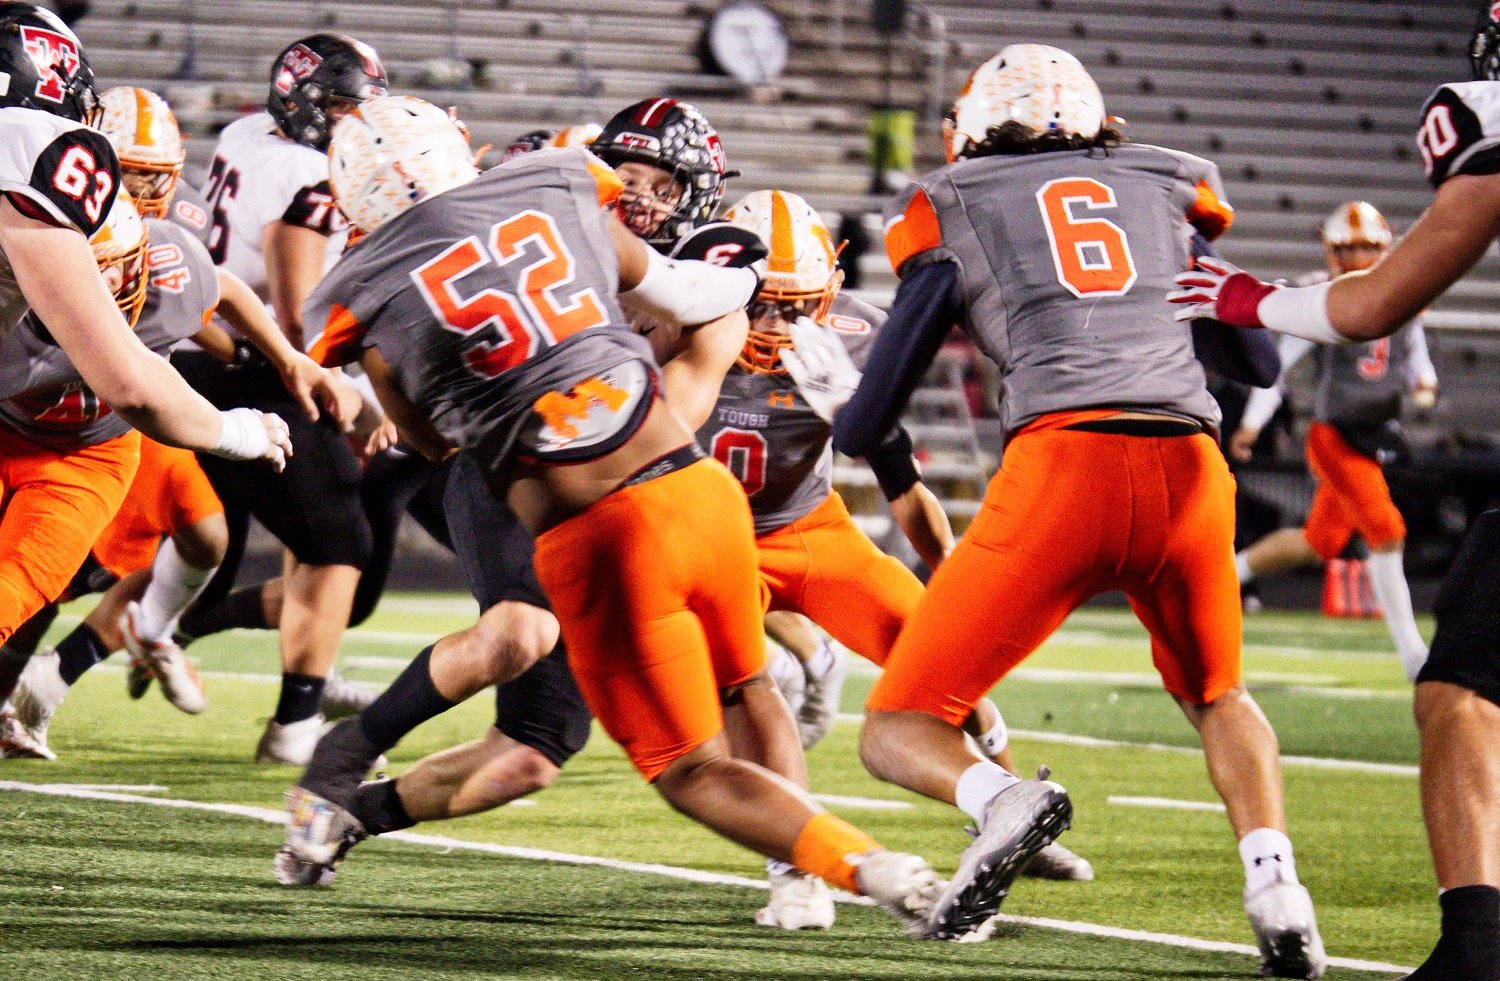 Nate Griffin (52) stops the West ballcarrier. [view more from Forney]